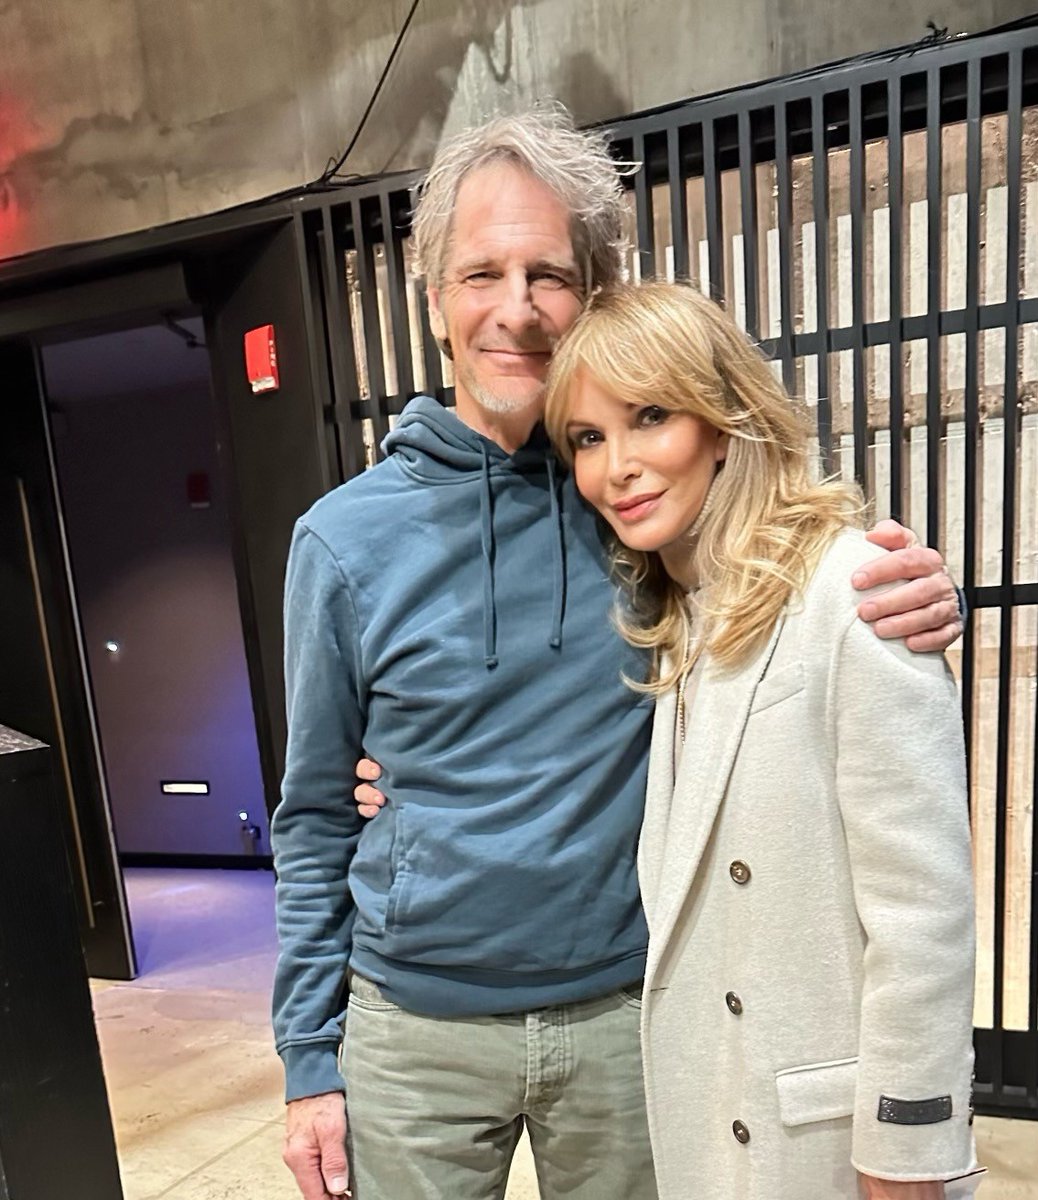 I had a wonderful time catching up with my friend Jaclyn Smith, who came to see 'The Connector' at the MCC Theater. @realjaclynsmith @JayDSchwartz